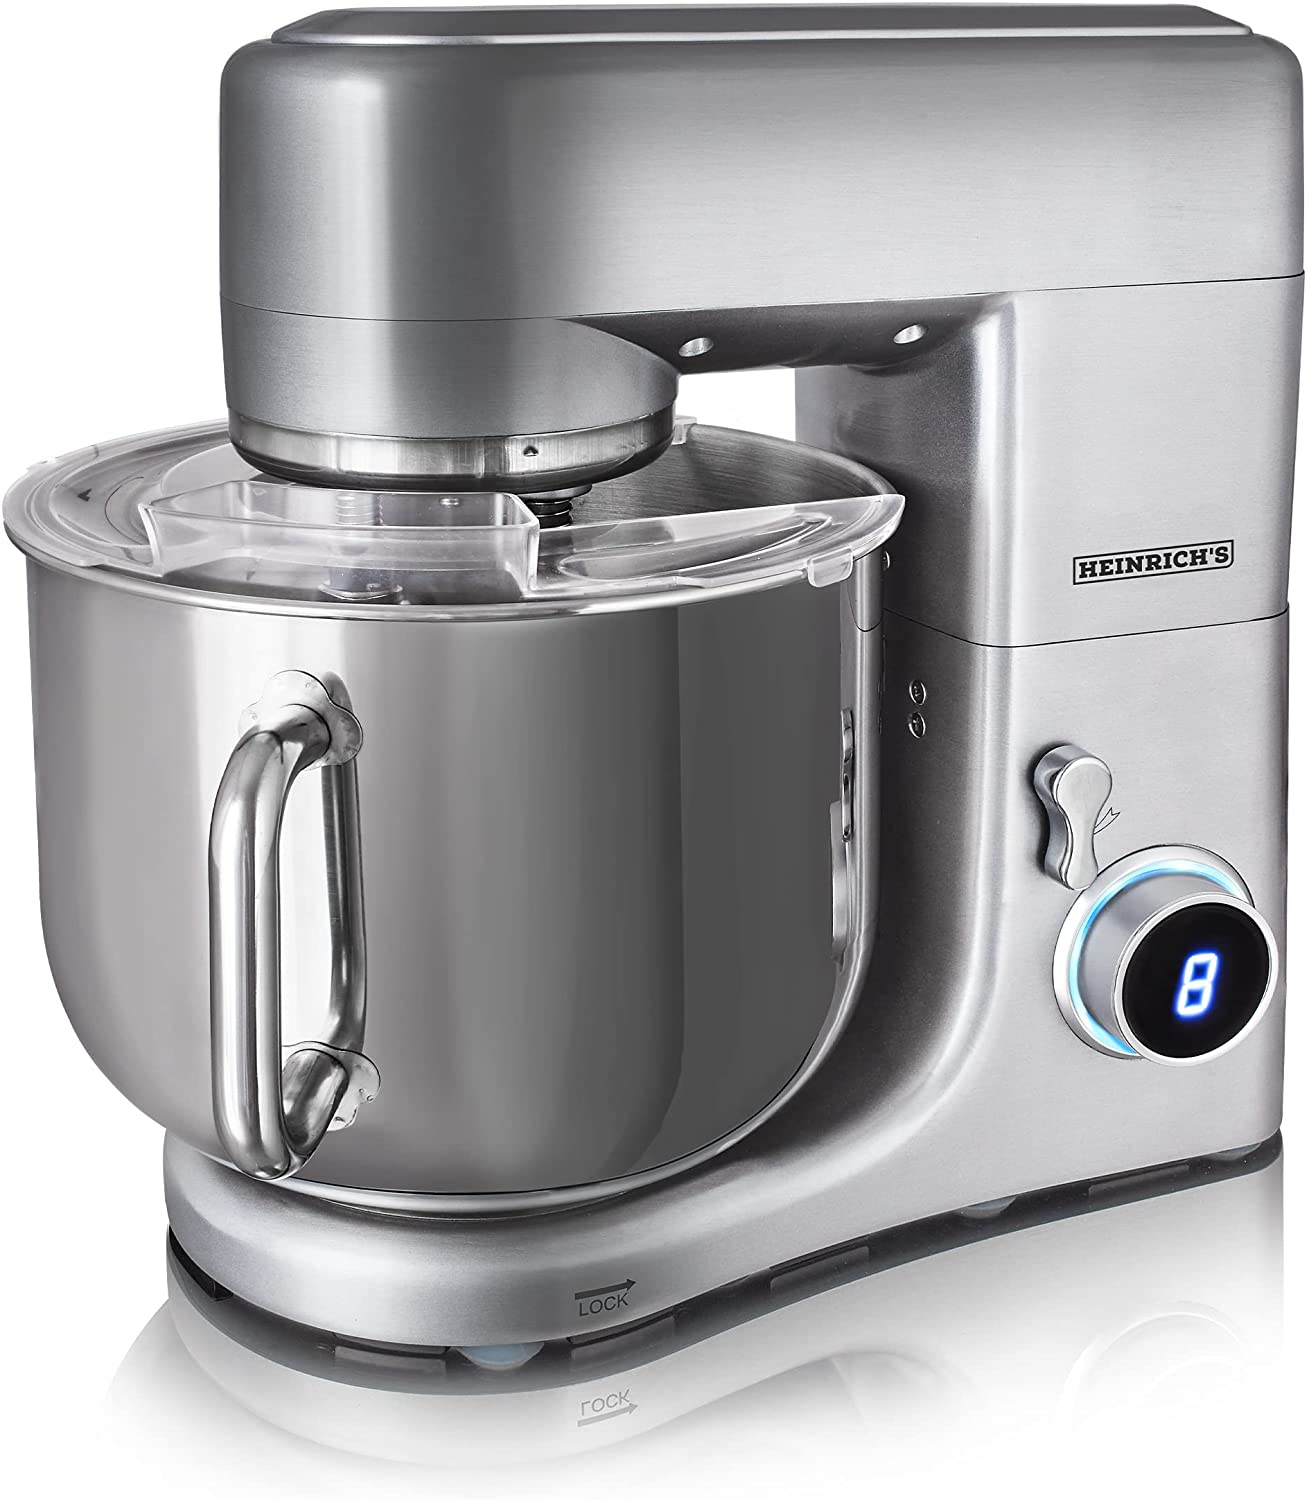 Heinrich´s Heinrichs Food Processor Kneading Machine Stainless Steel Bowl 1800 W Powerful Patented Dough Hook 8 Levels LCD Display Multifunctional Dough Kneading Machine (11 Litres)